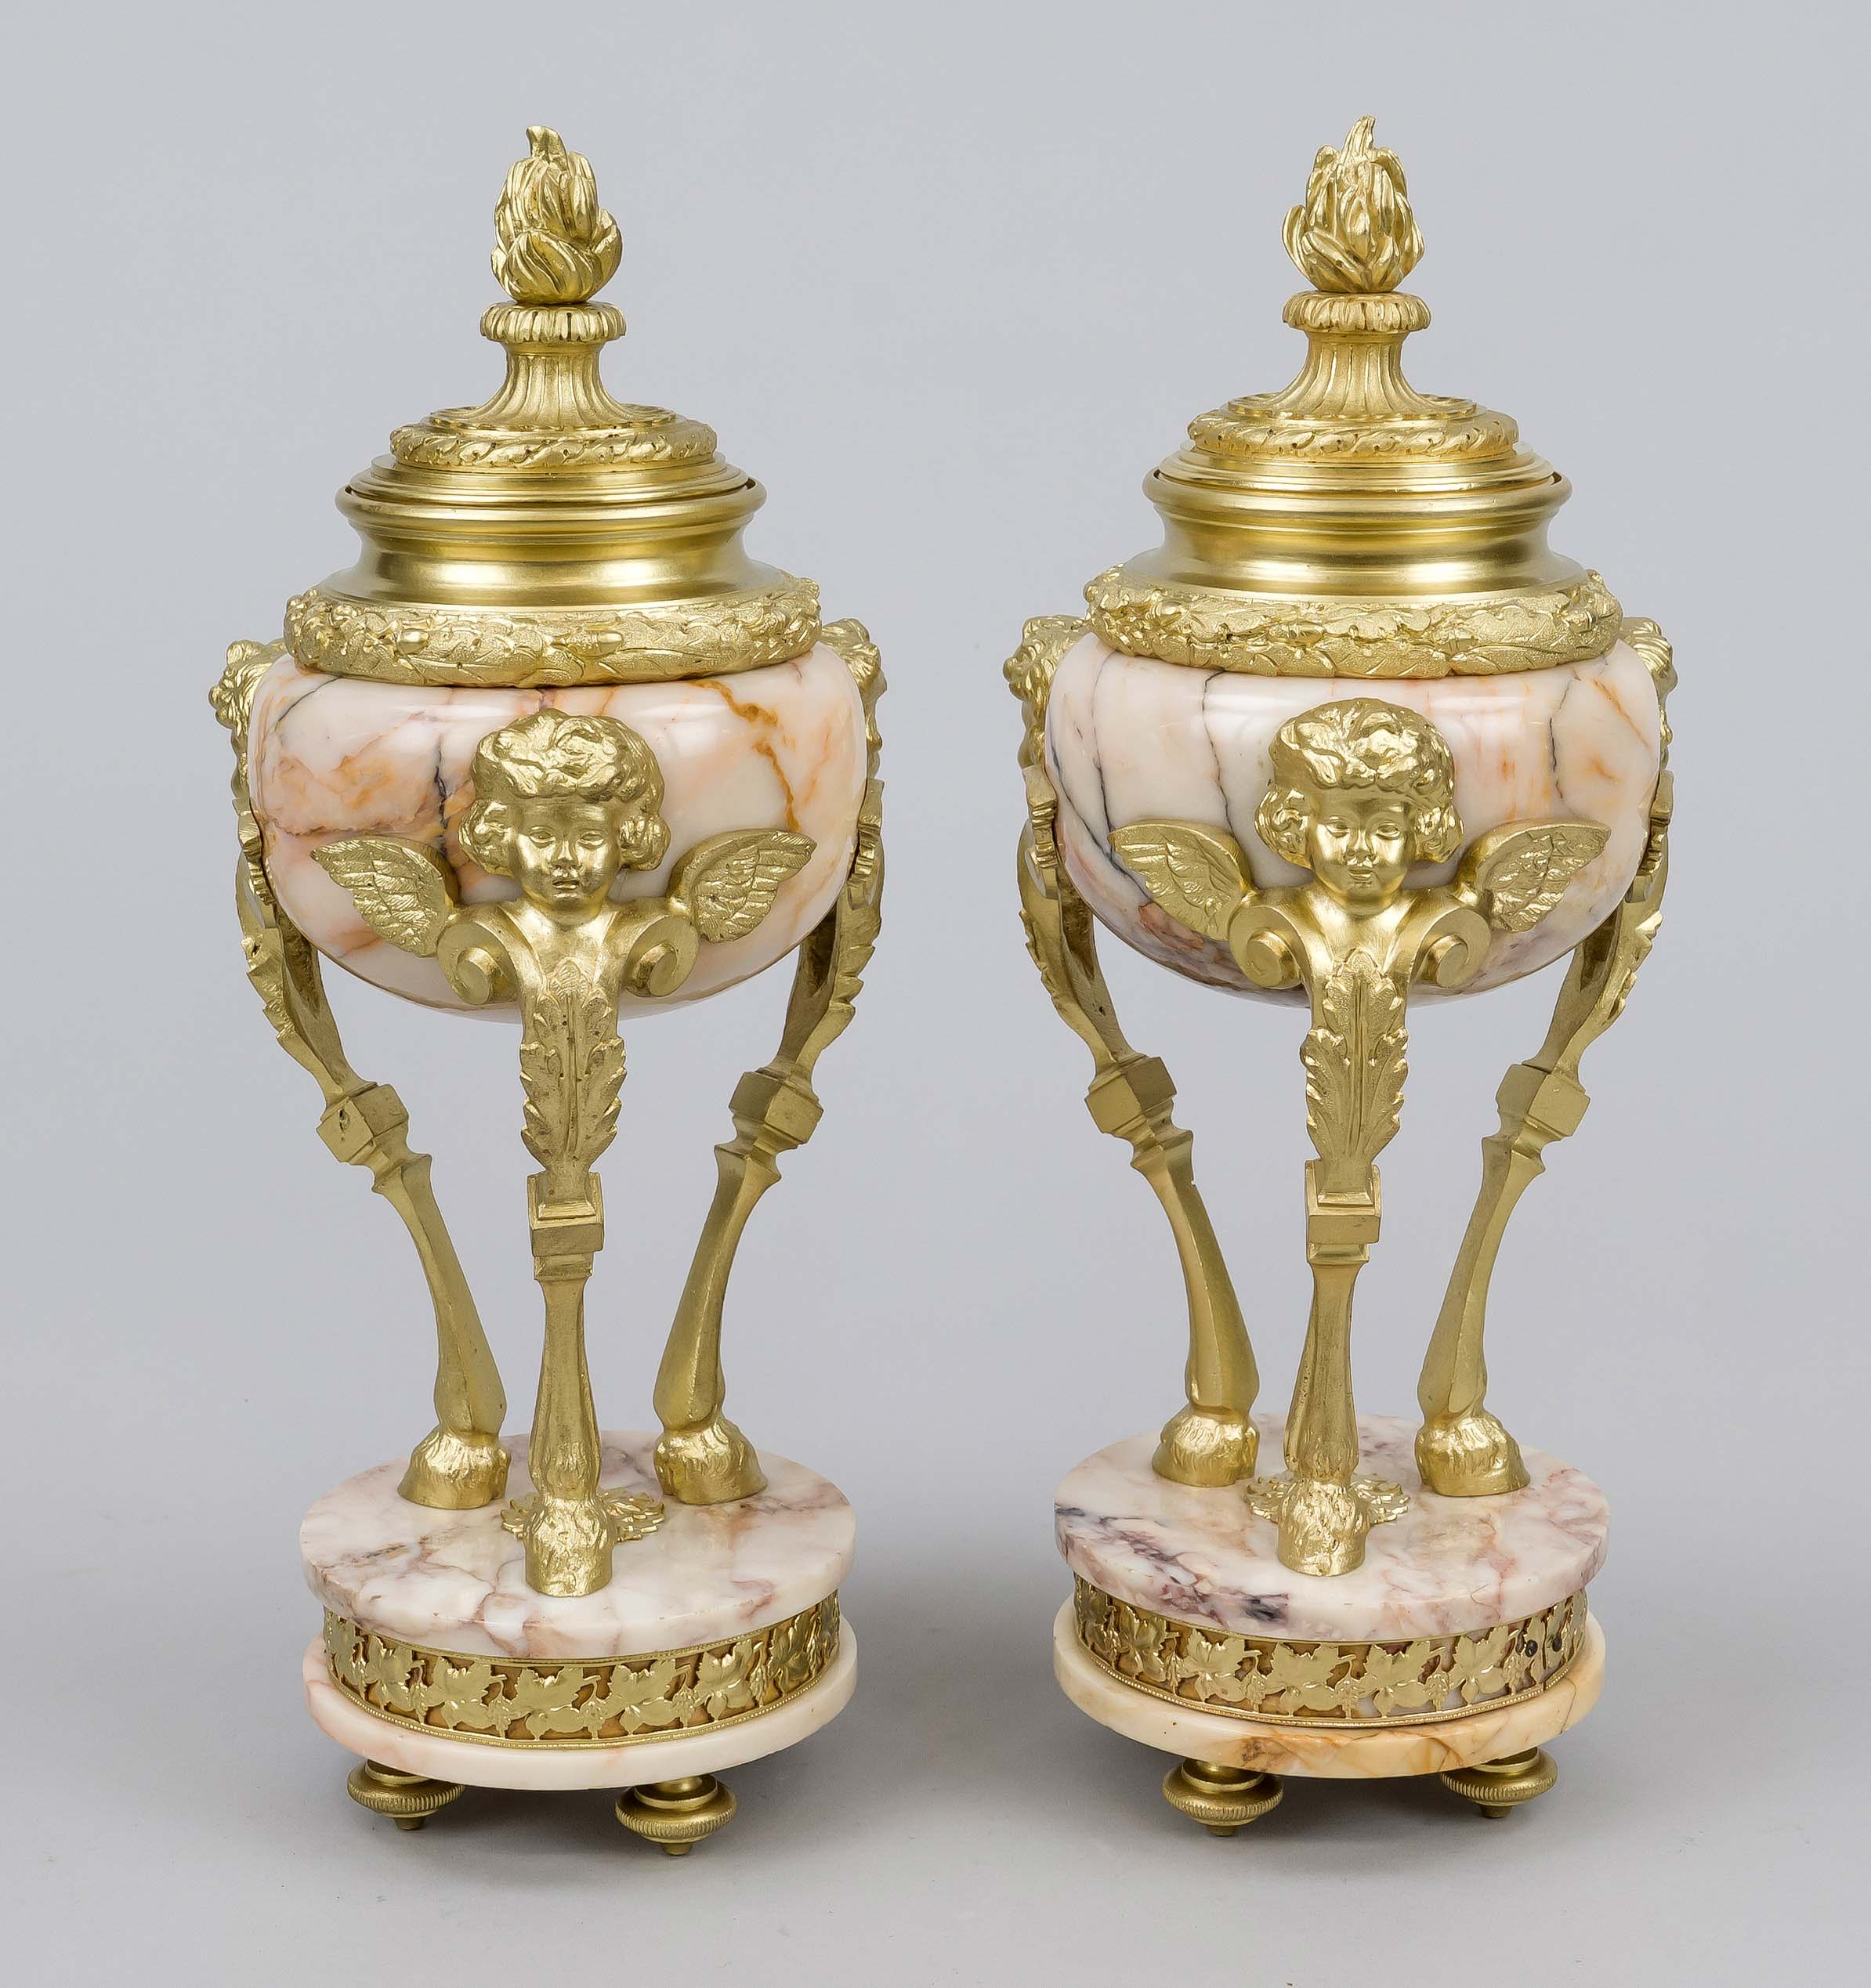 Pair of side plates, France 19th century, pink marble with gilt bronze applications, round plinth on